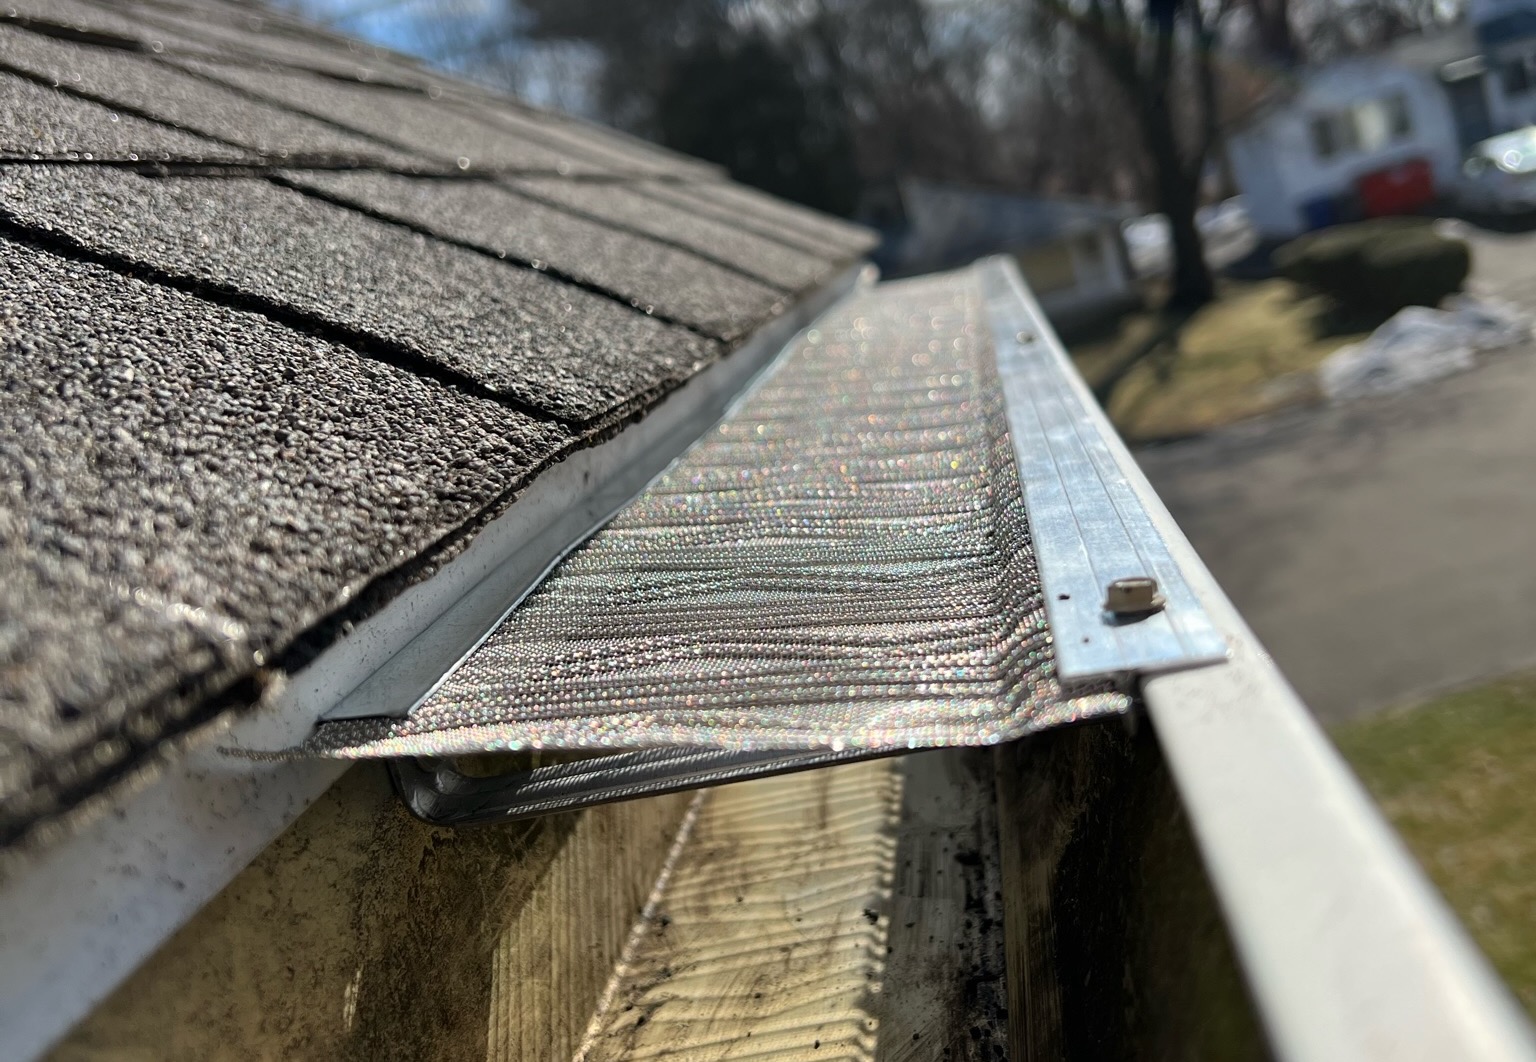 Gutter guards installation on existing gutters - Best gutter contractor near me in Stamford, Norwalk, Westport, Wilton, Weston, Easton, Fairfield, Trumbull, Stratford, Milford, New Canaan, Connecticut